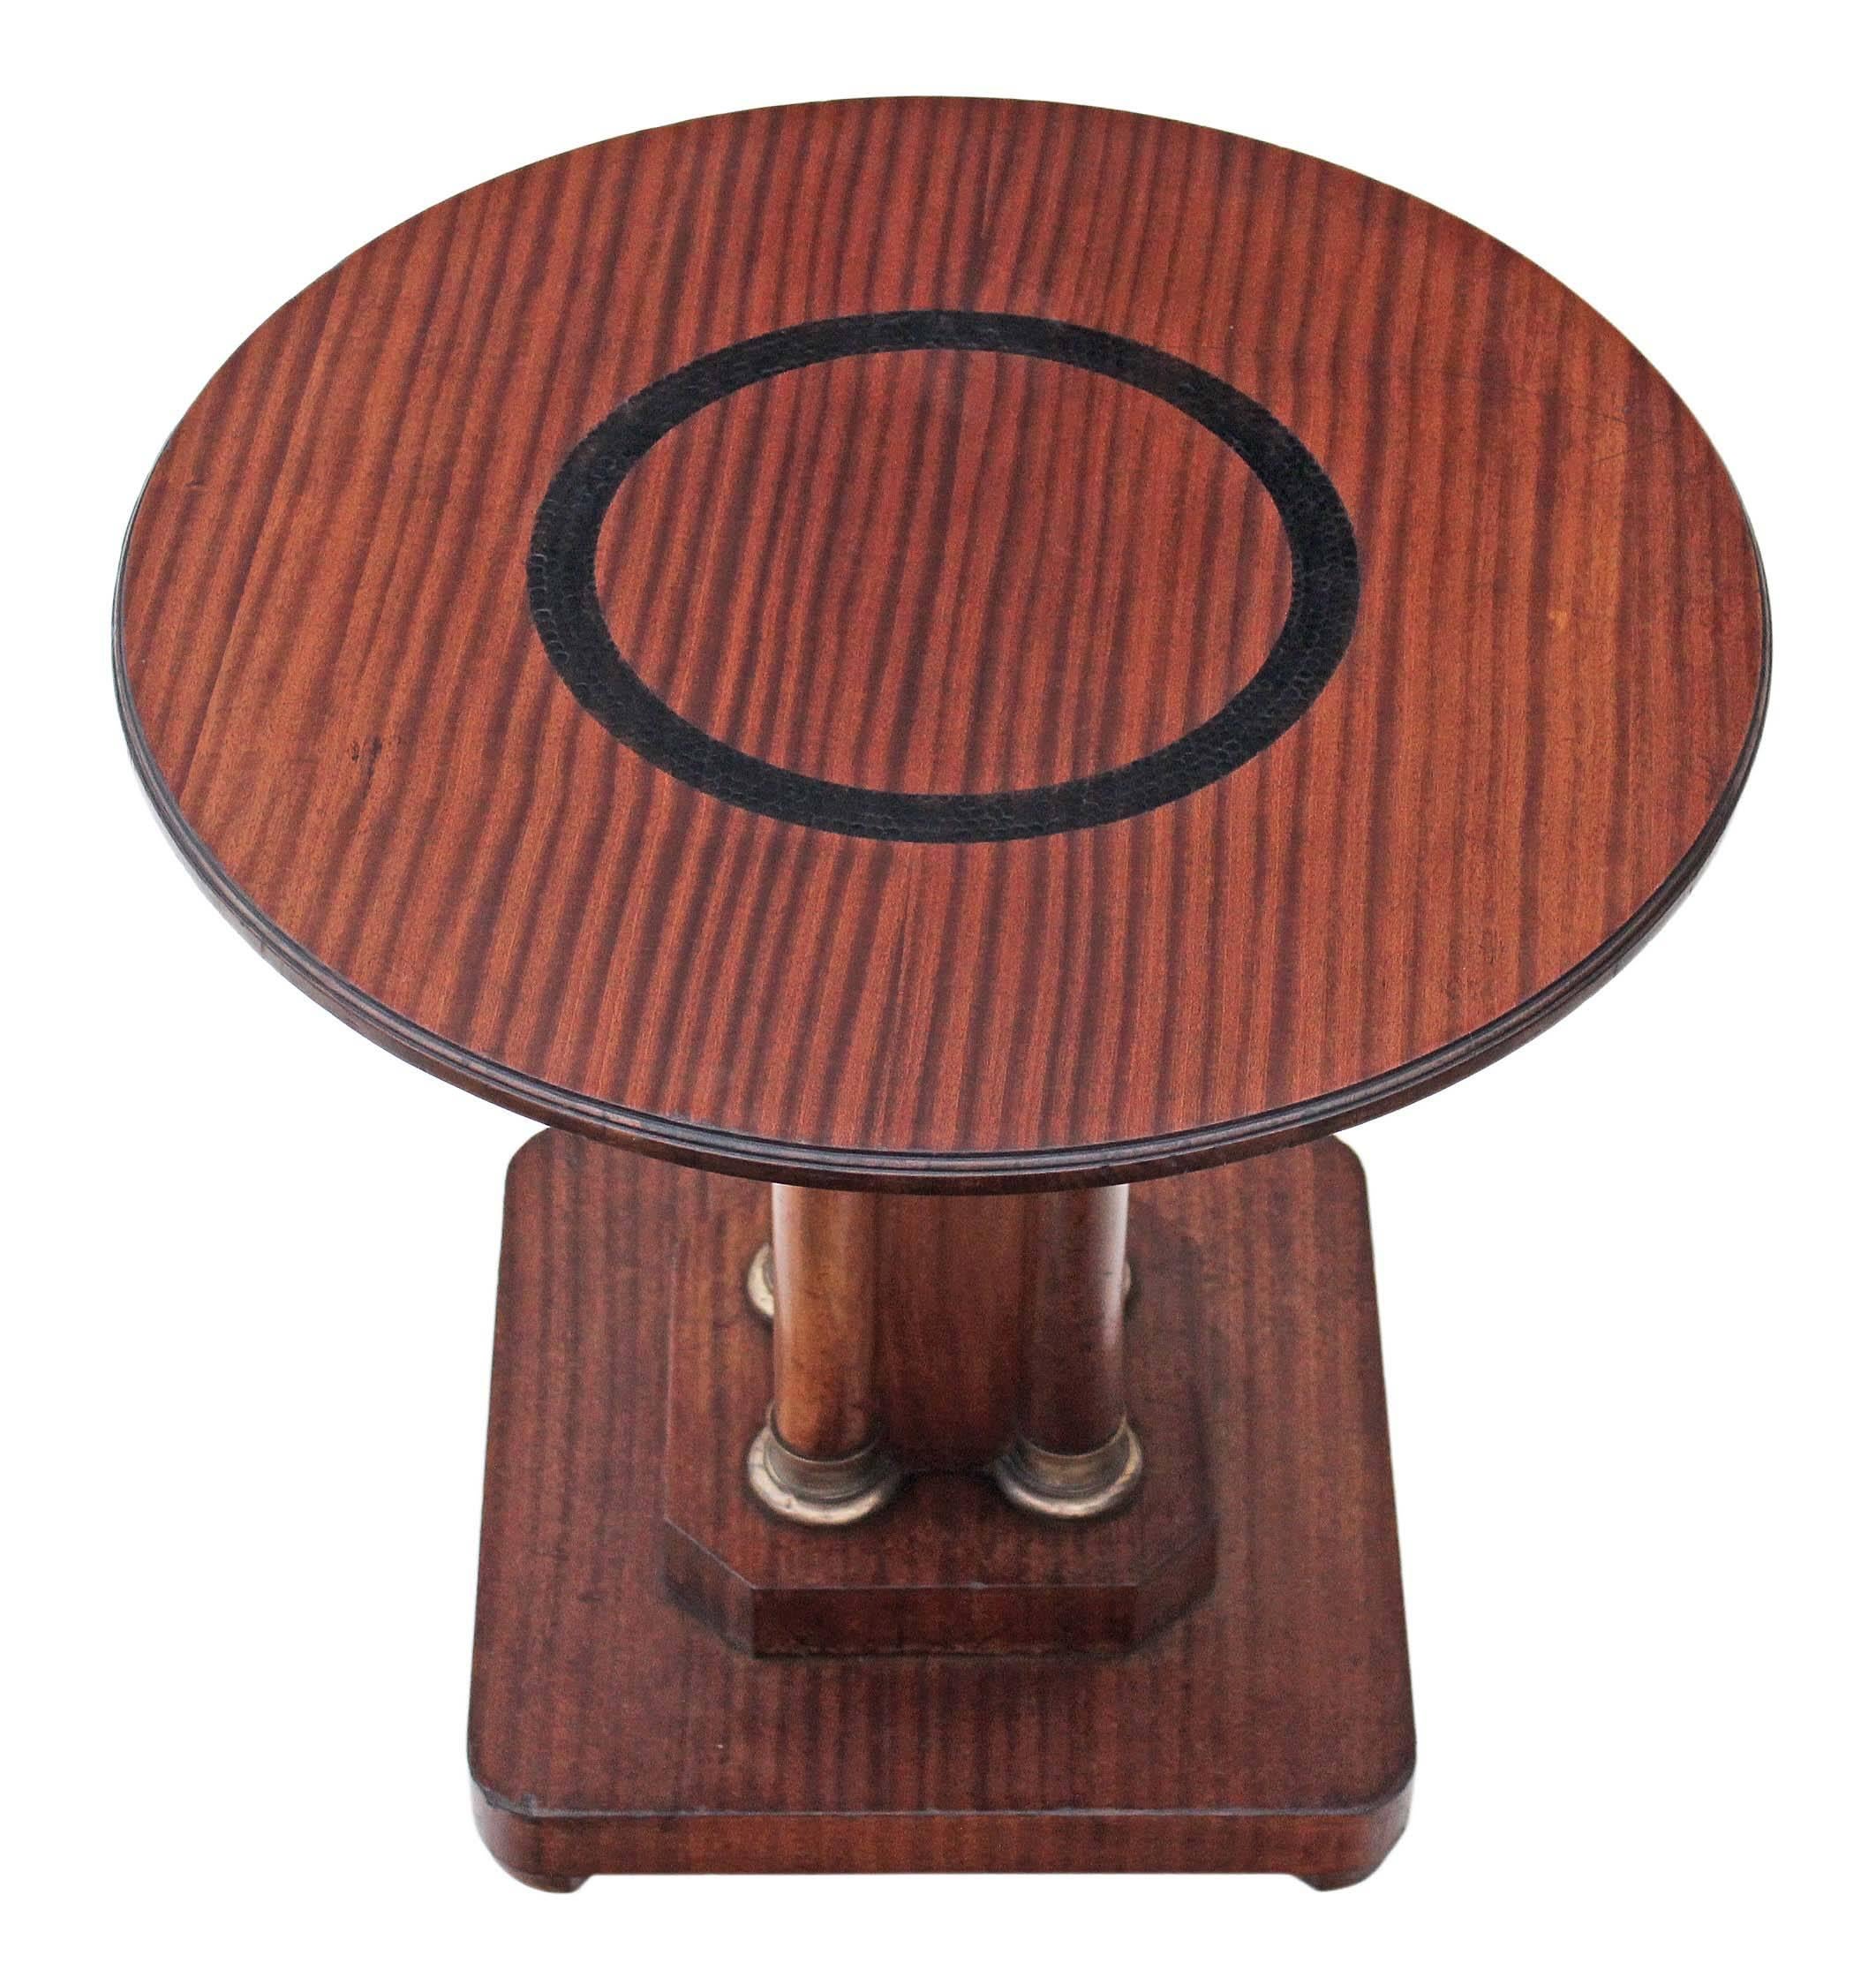 Art Deco 20th Century Mahogany Centre Window Side Lamp Supper Table Pedestal In Good Condition For Sale In Wisbech, Walton Wisbech